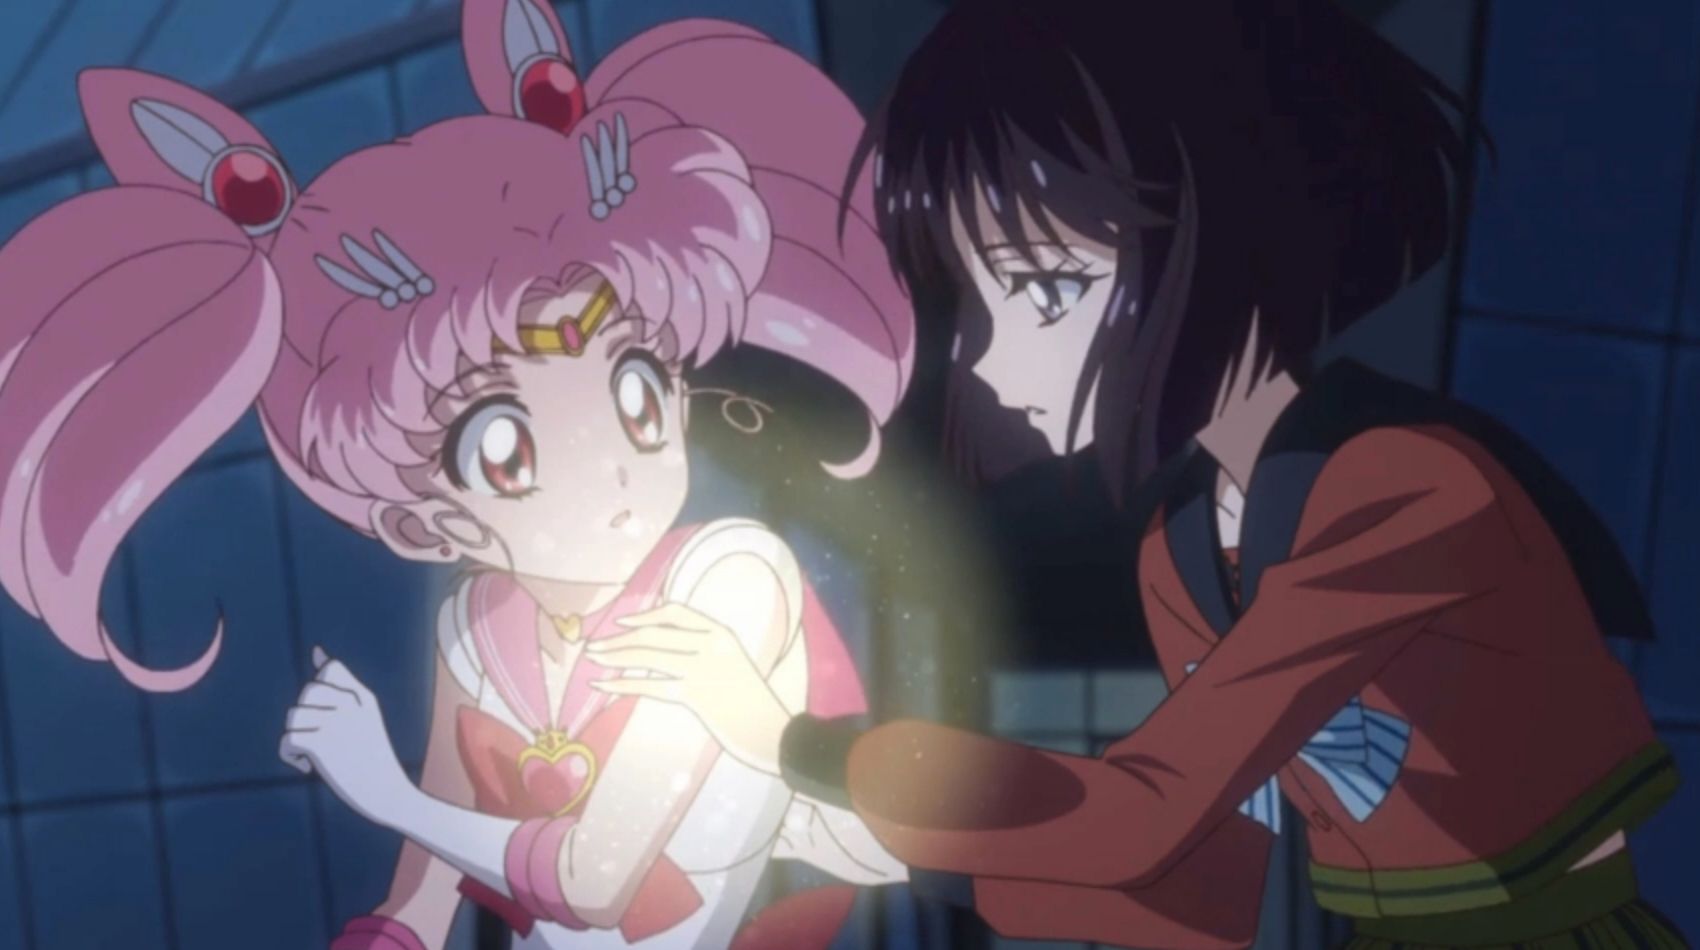 Hotaru heals Chibiusa after a fight in Sailor Moon Crystal